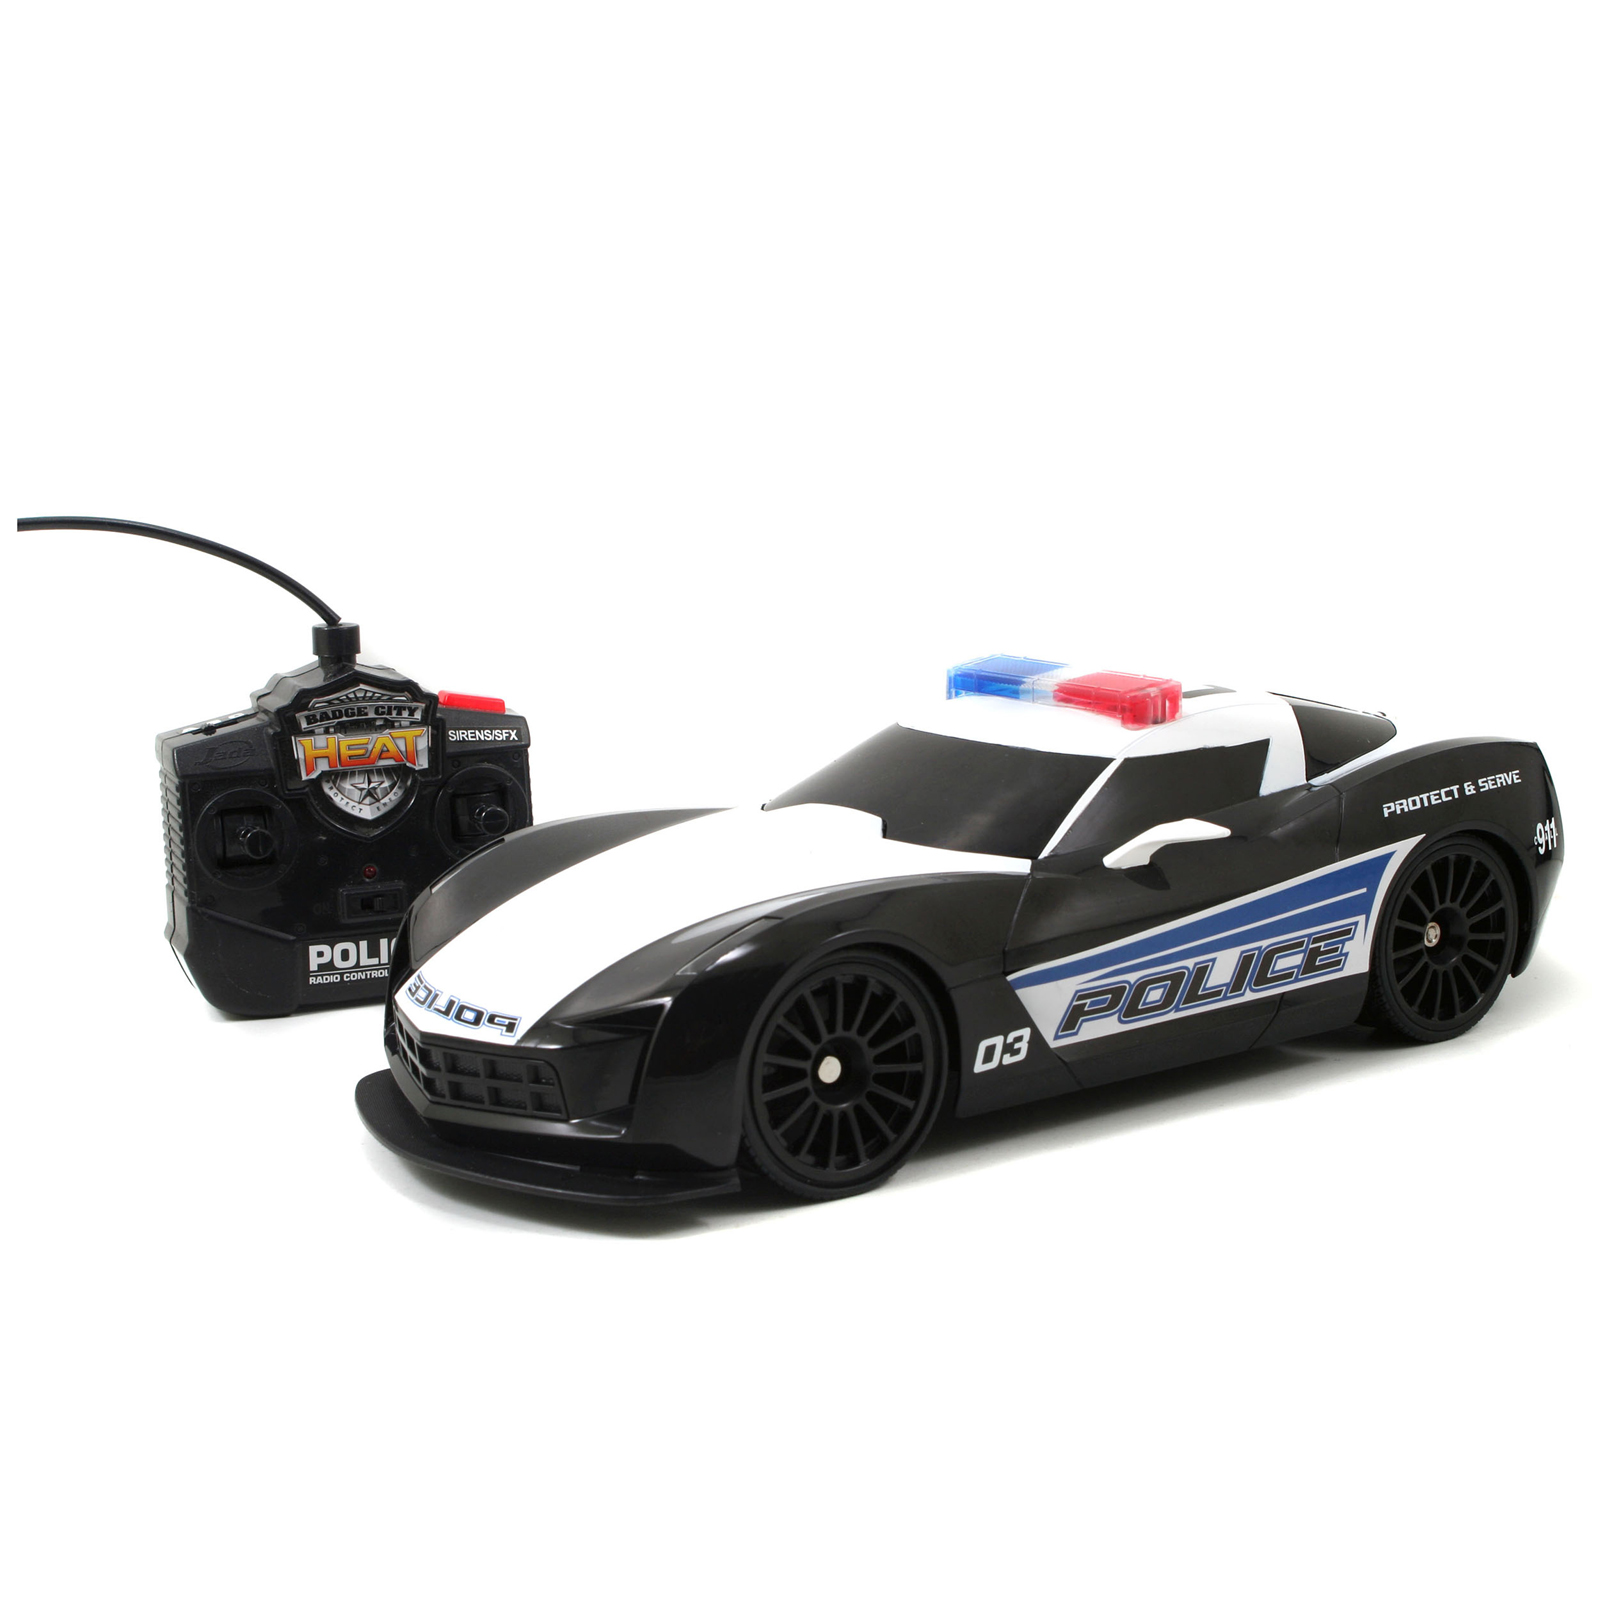 Heat 1:16 2009 Corvette Stingray Concept Remote Control Car with Lights and Sounds